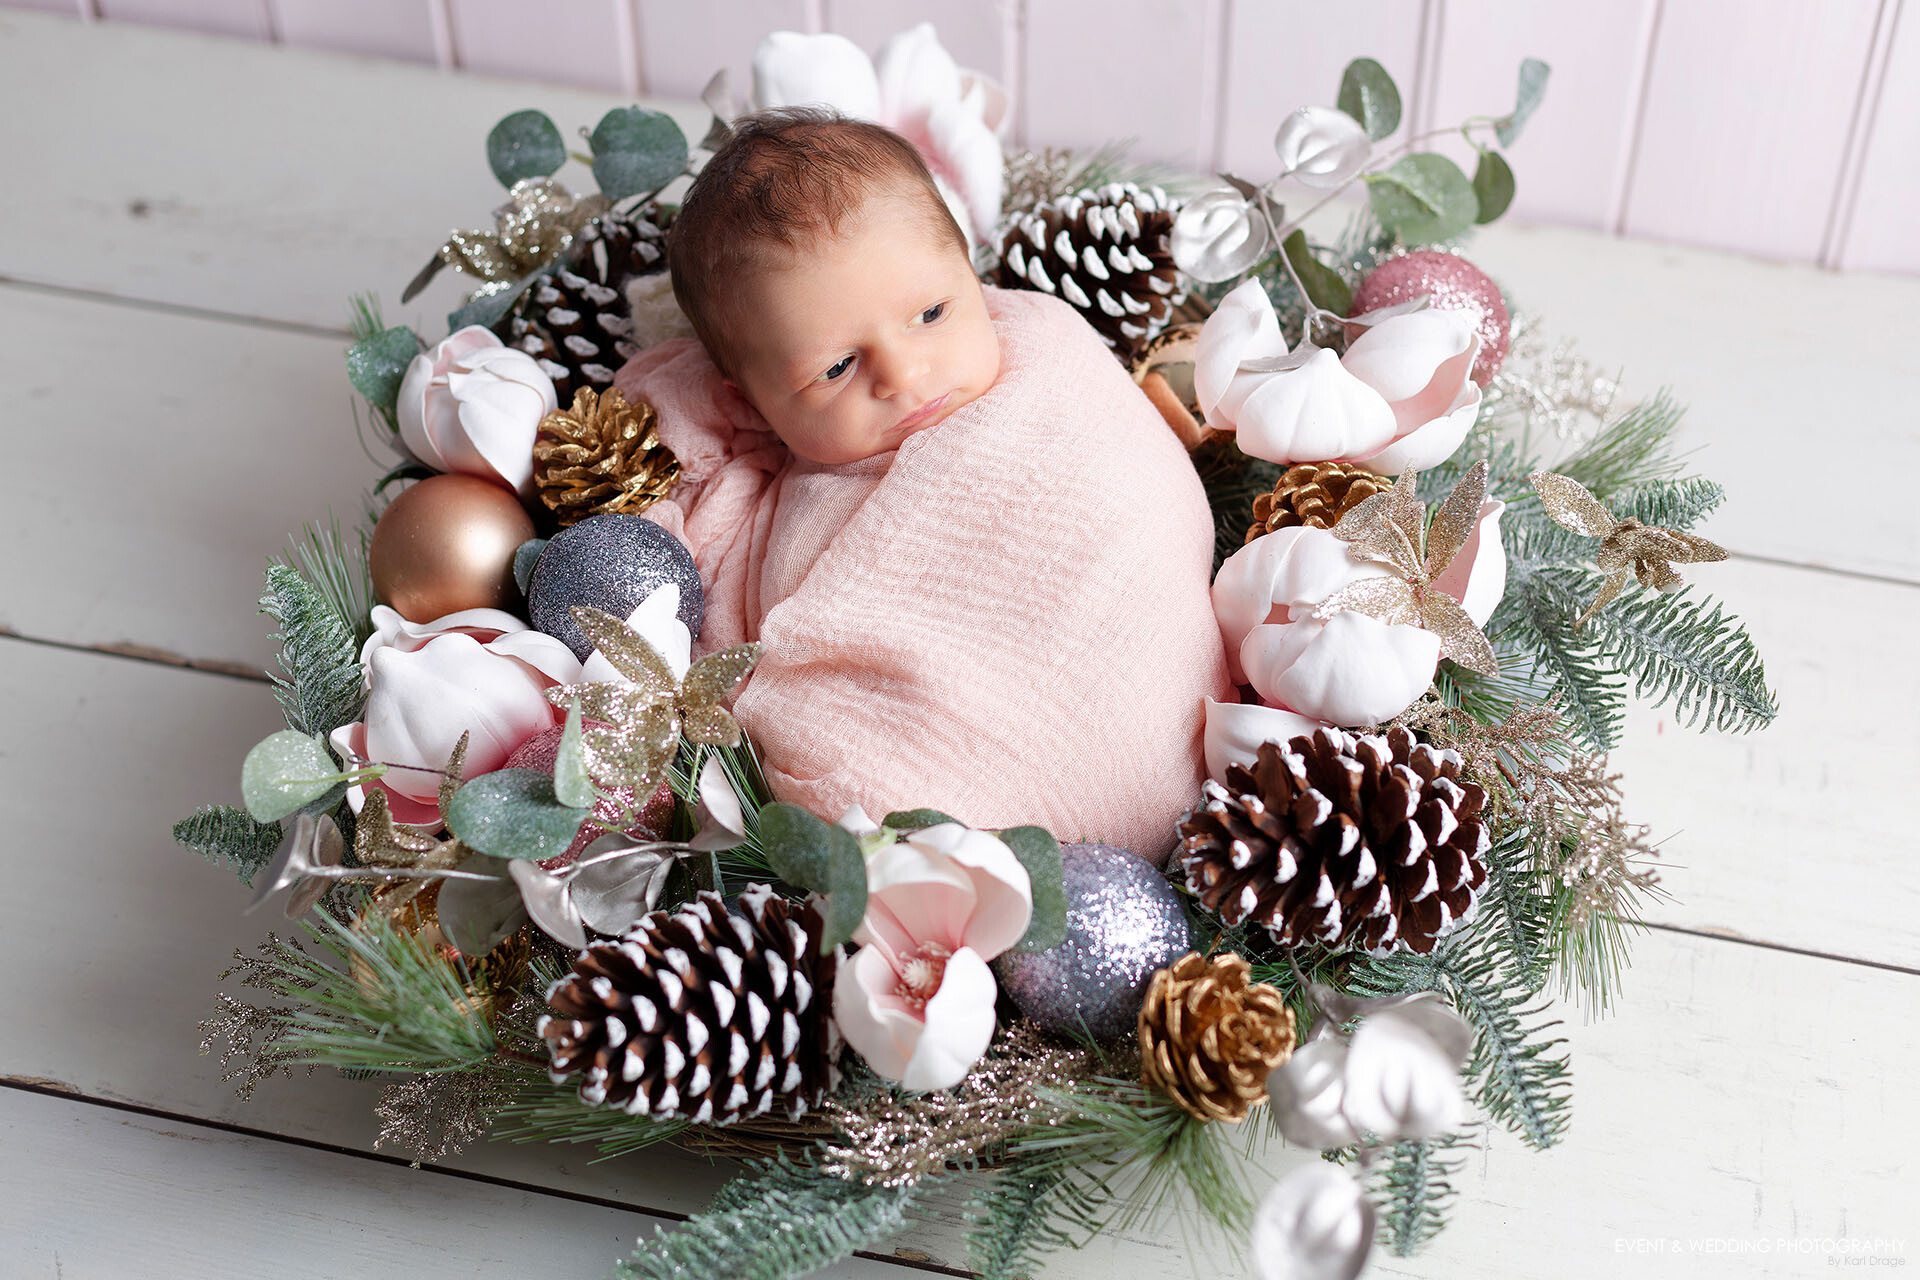 A newborn baby girl posed in a Christmas wreath as part of her baby photo shoot.